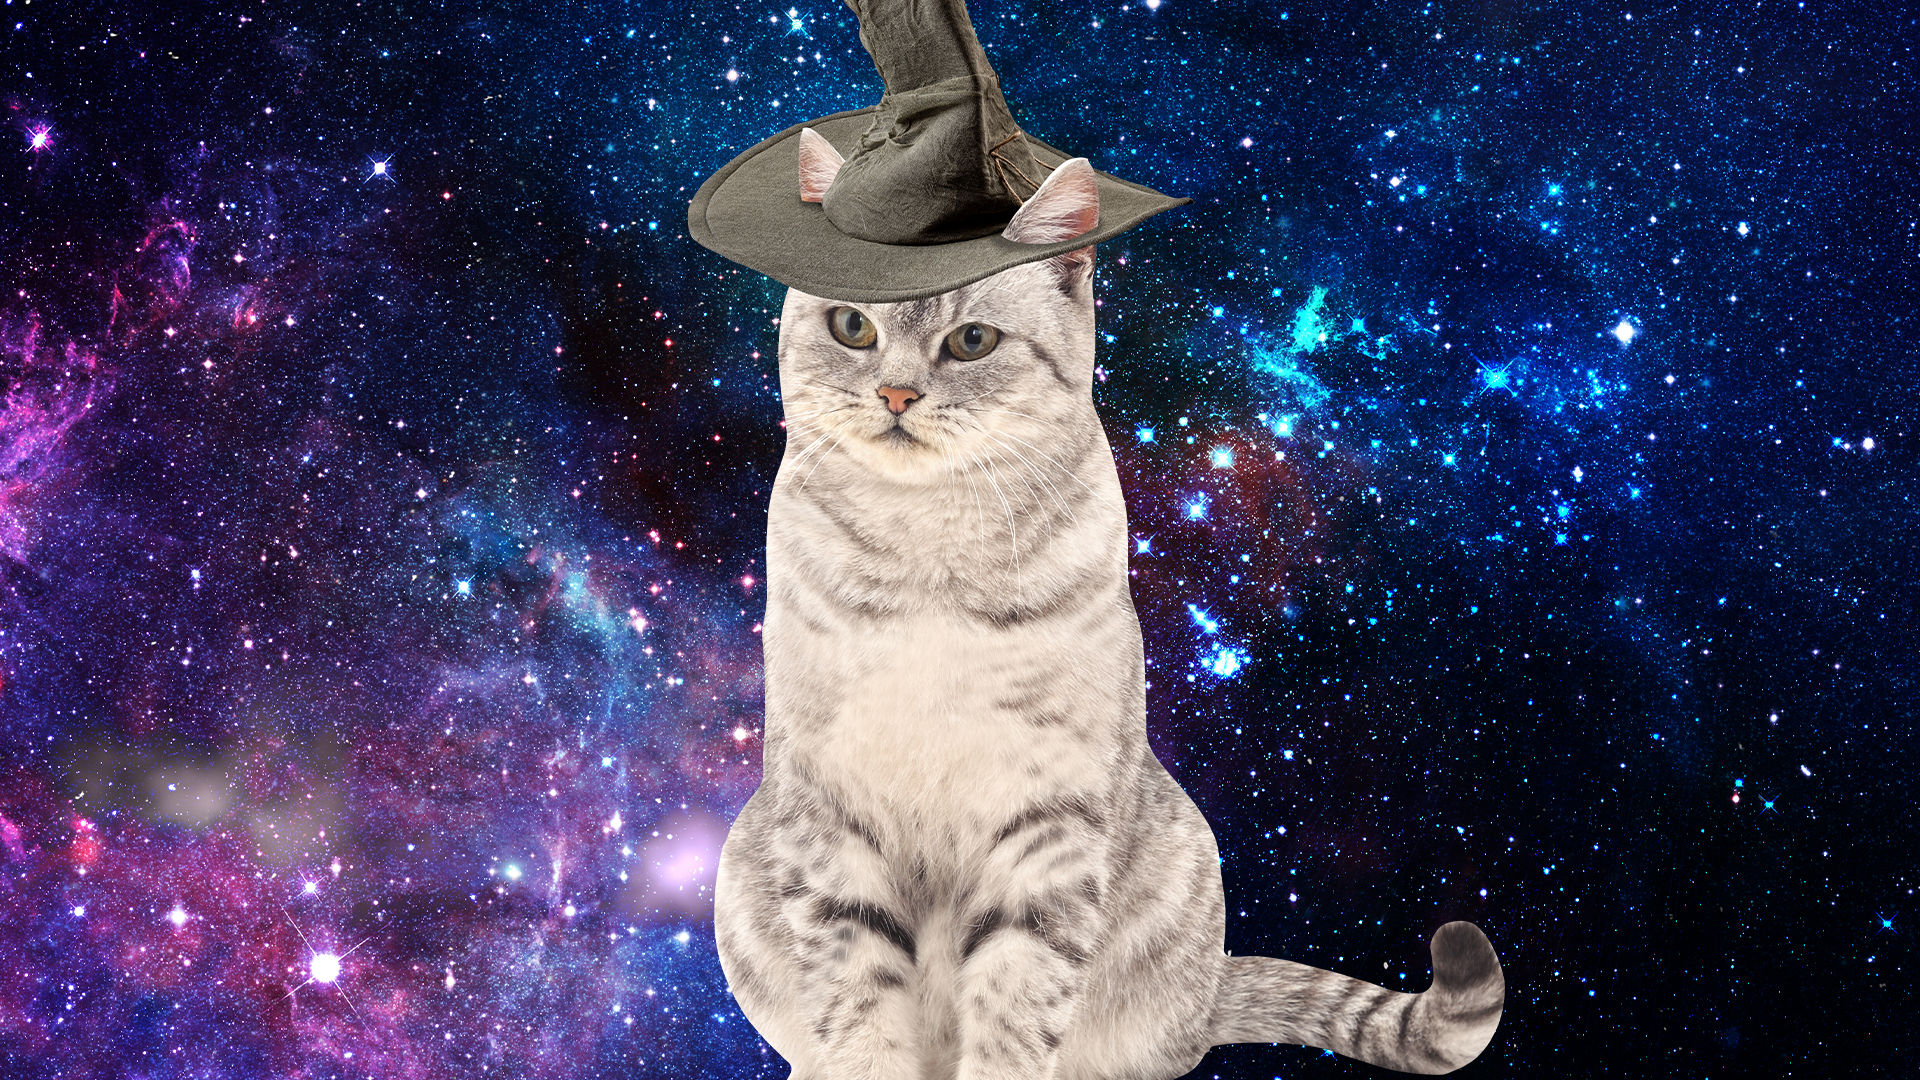 Cat in a witch's hat on starry background